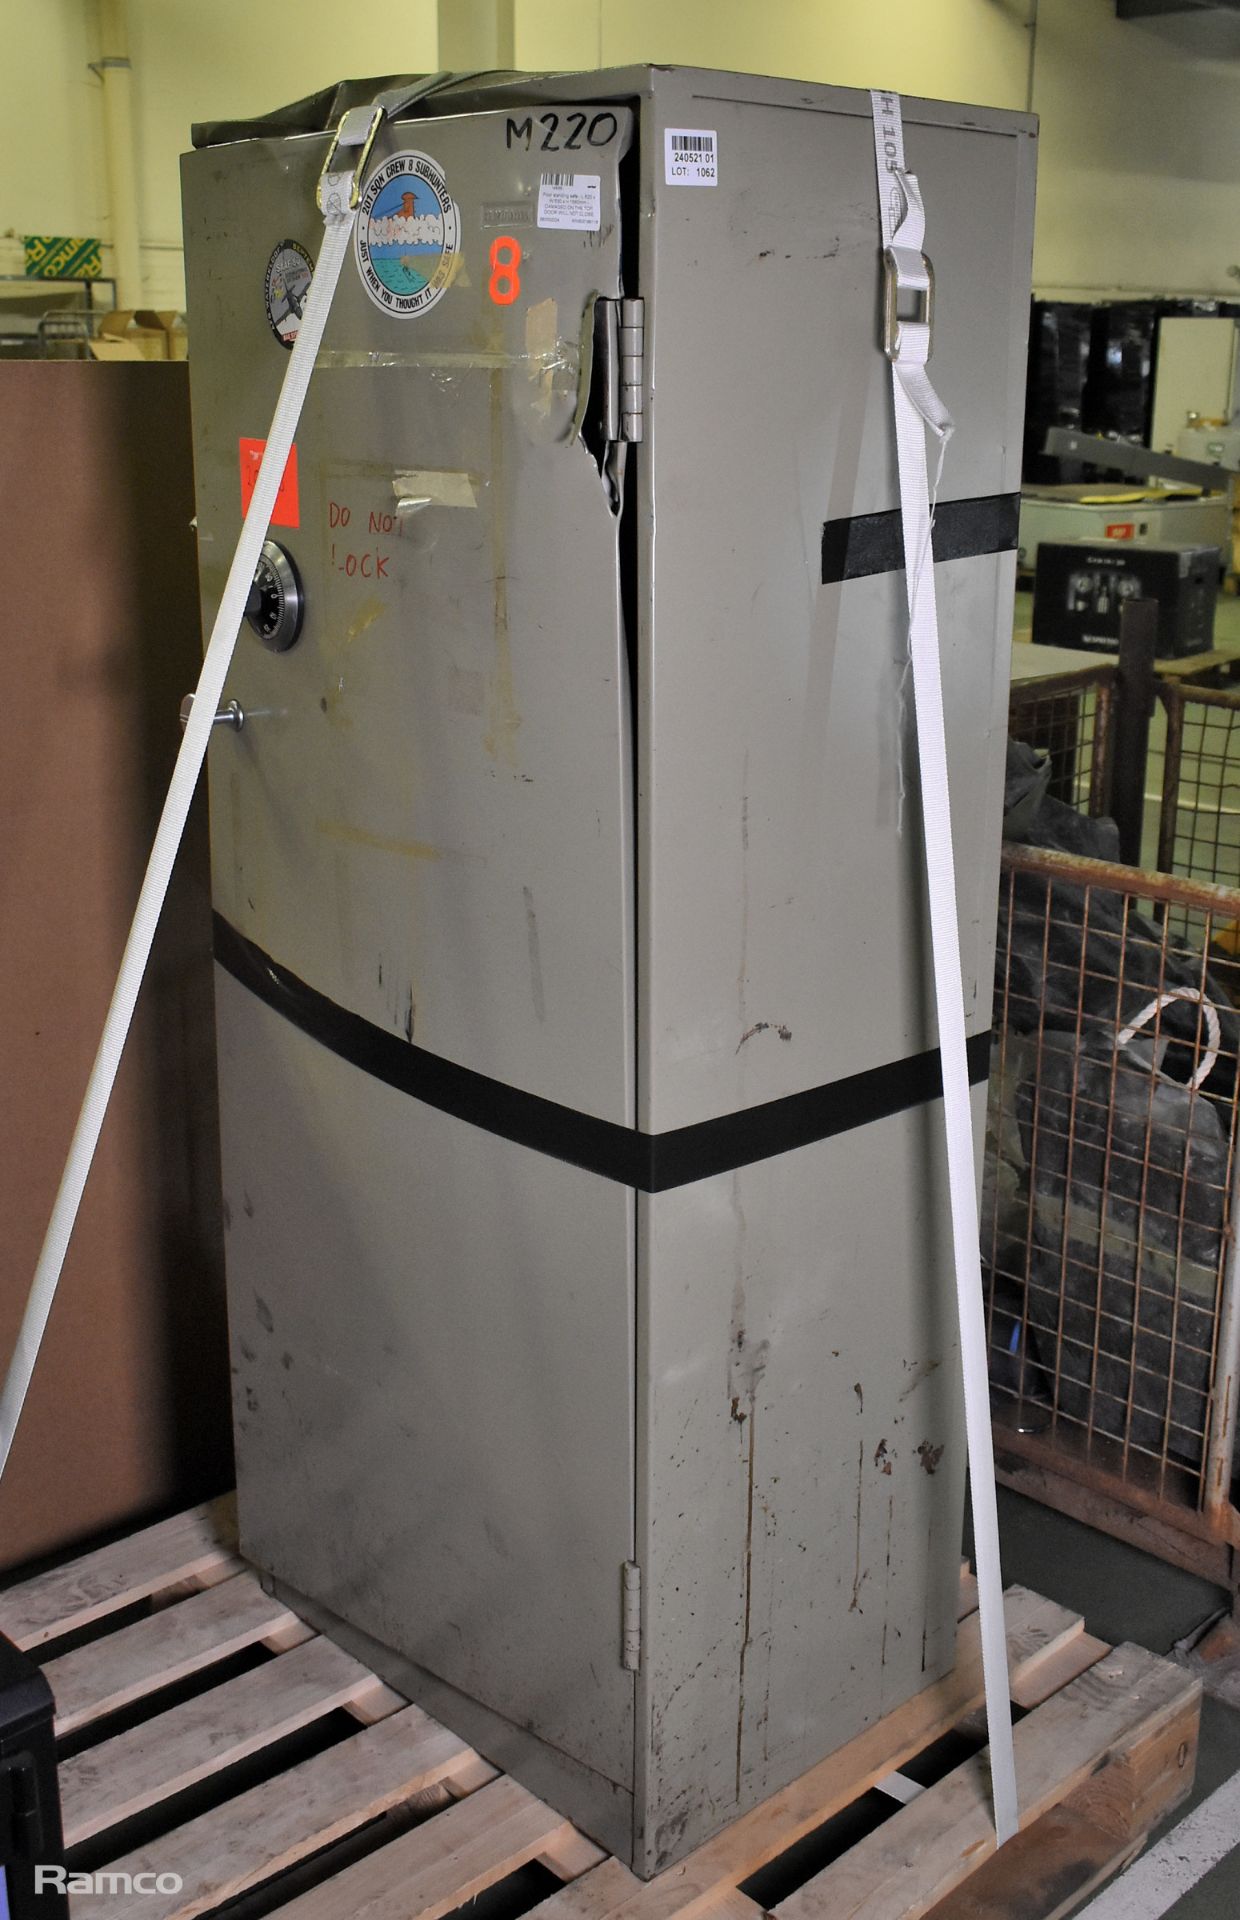 Floor standing safe - L 620 x W 530 x H 1560mm - DAMAGED ON THE TOP, DOOR WILL NOT CLOSE